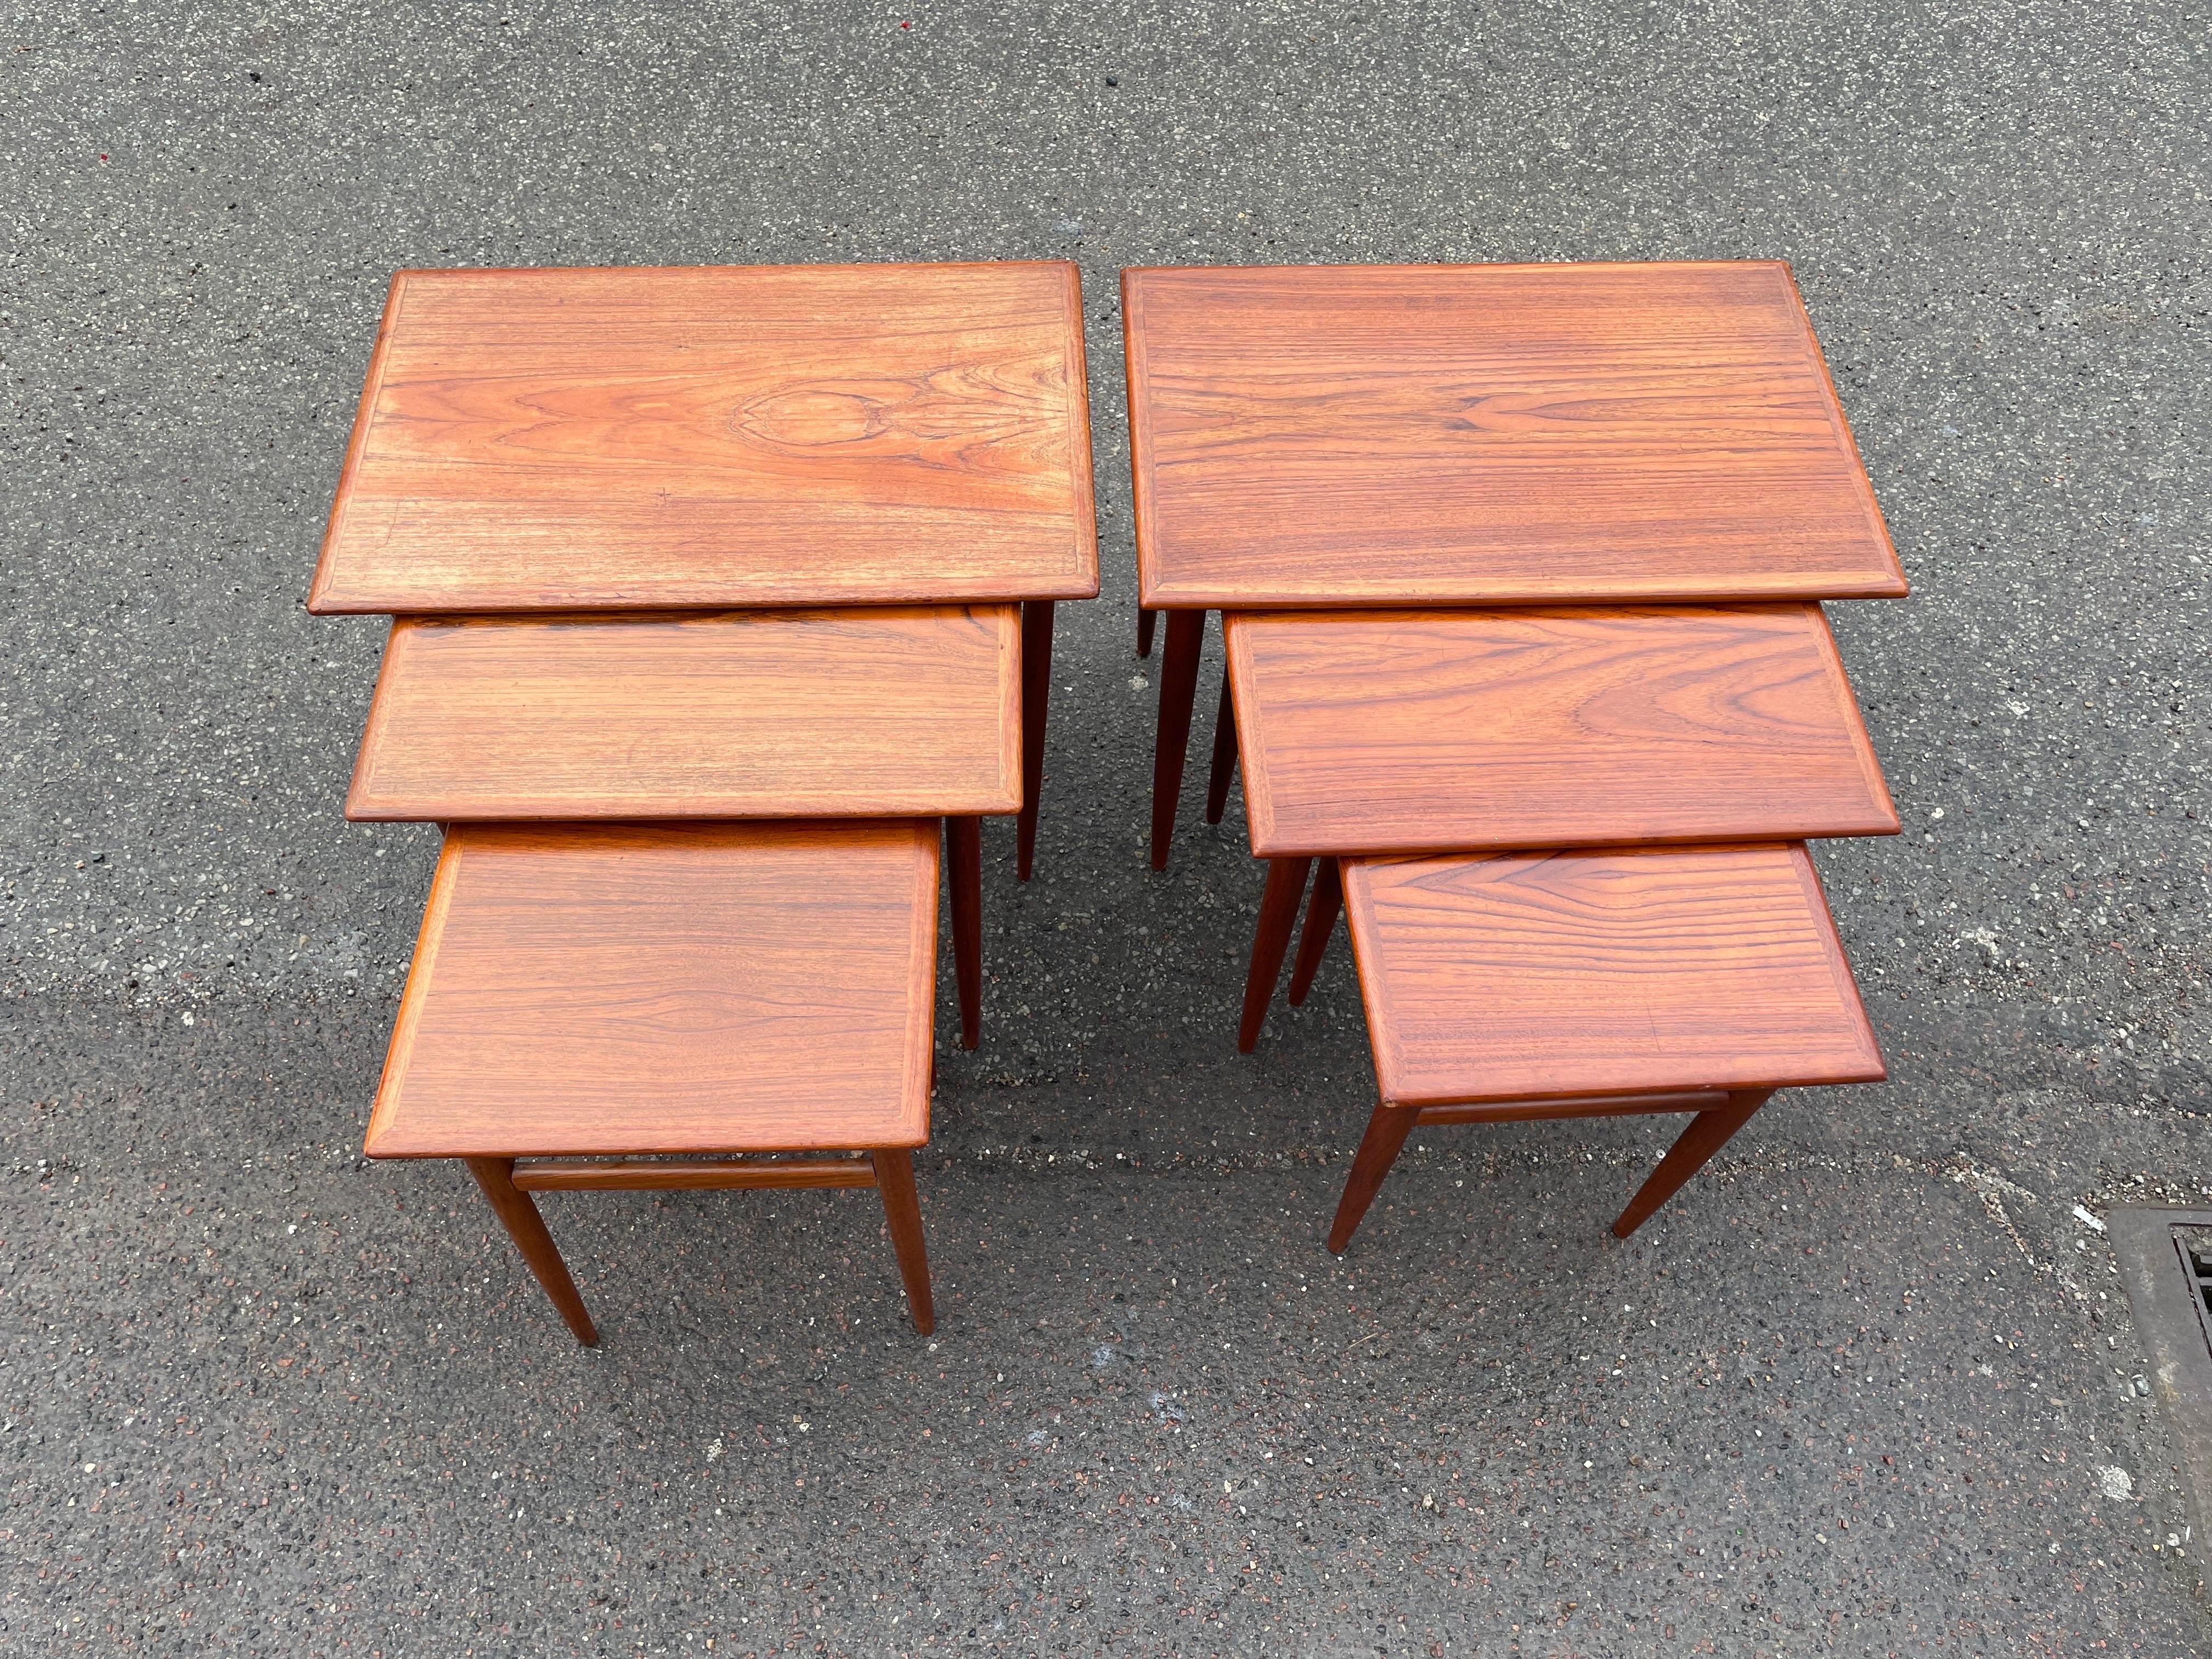 Mid-Century Modern Pair of Identical Danish Teak Nesting Tables from the, 1960s For Sale